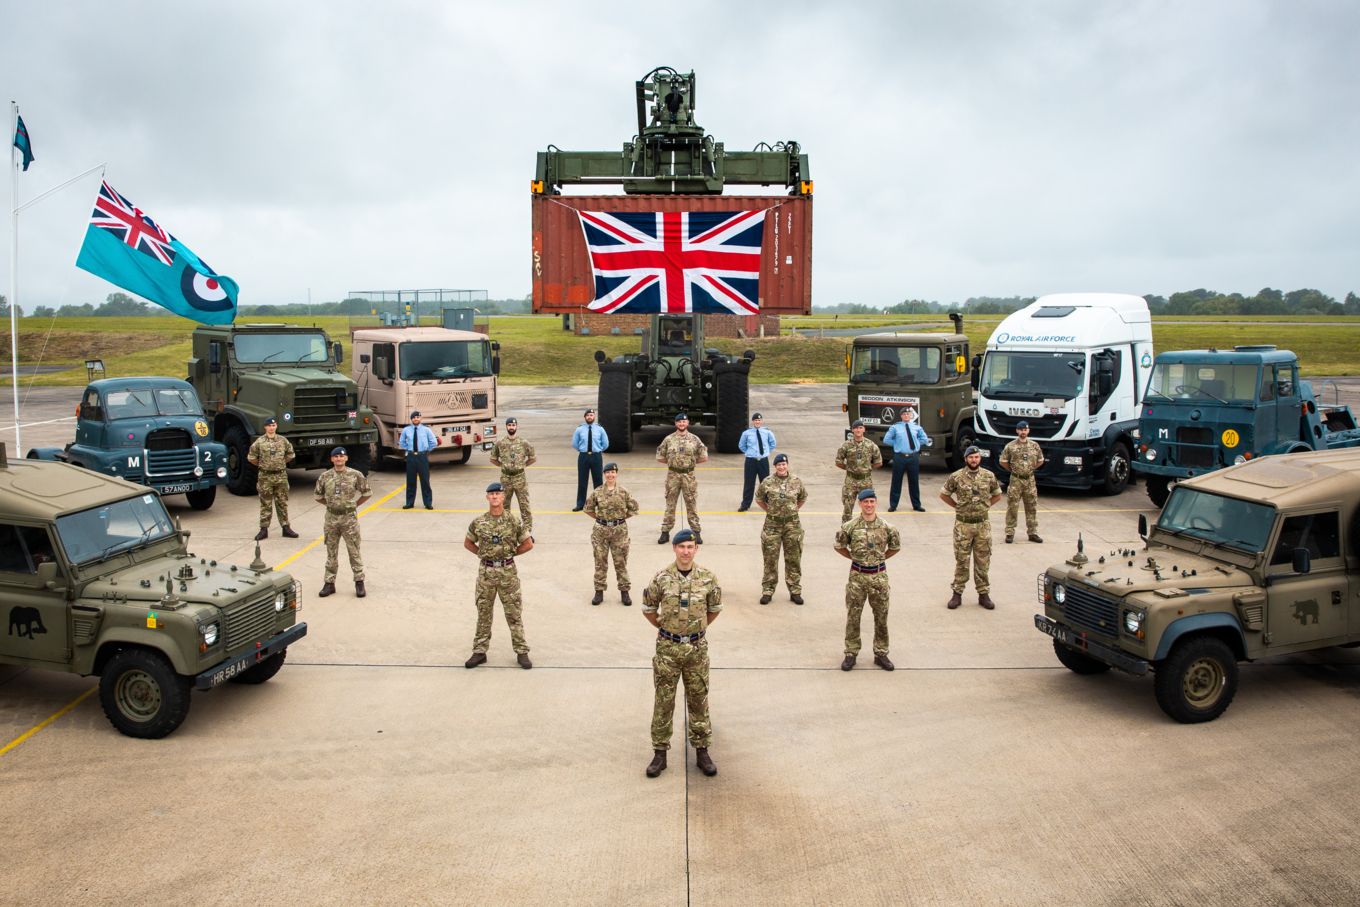 A special photo taken at RAF Wittering showing 2MT’s current and past vehicles.